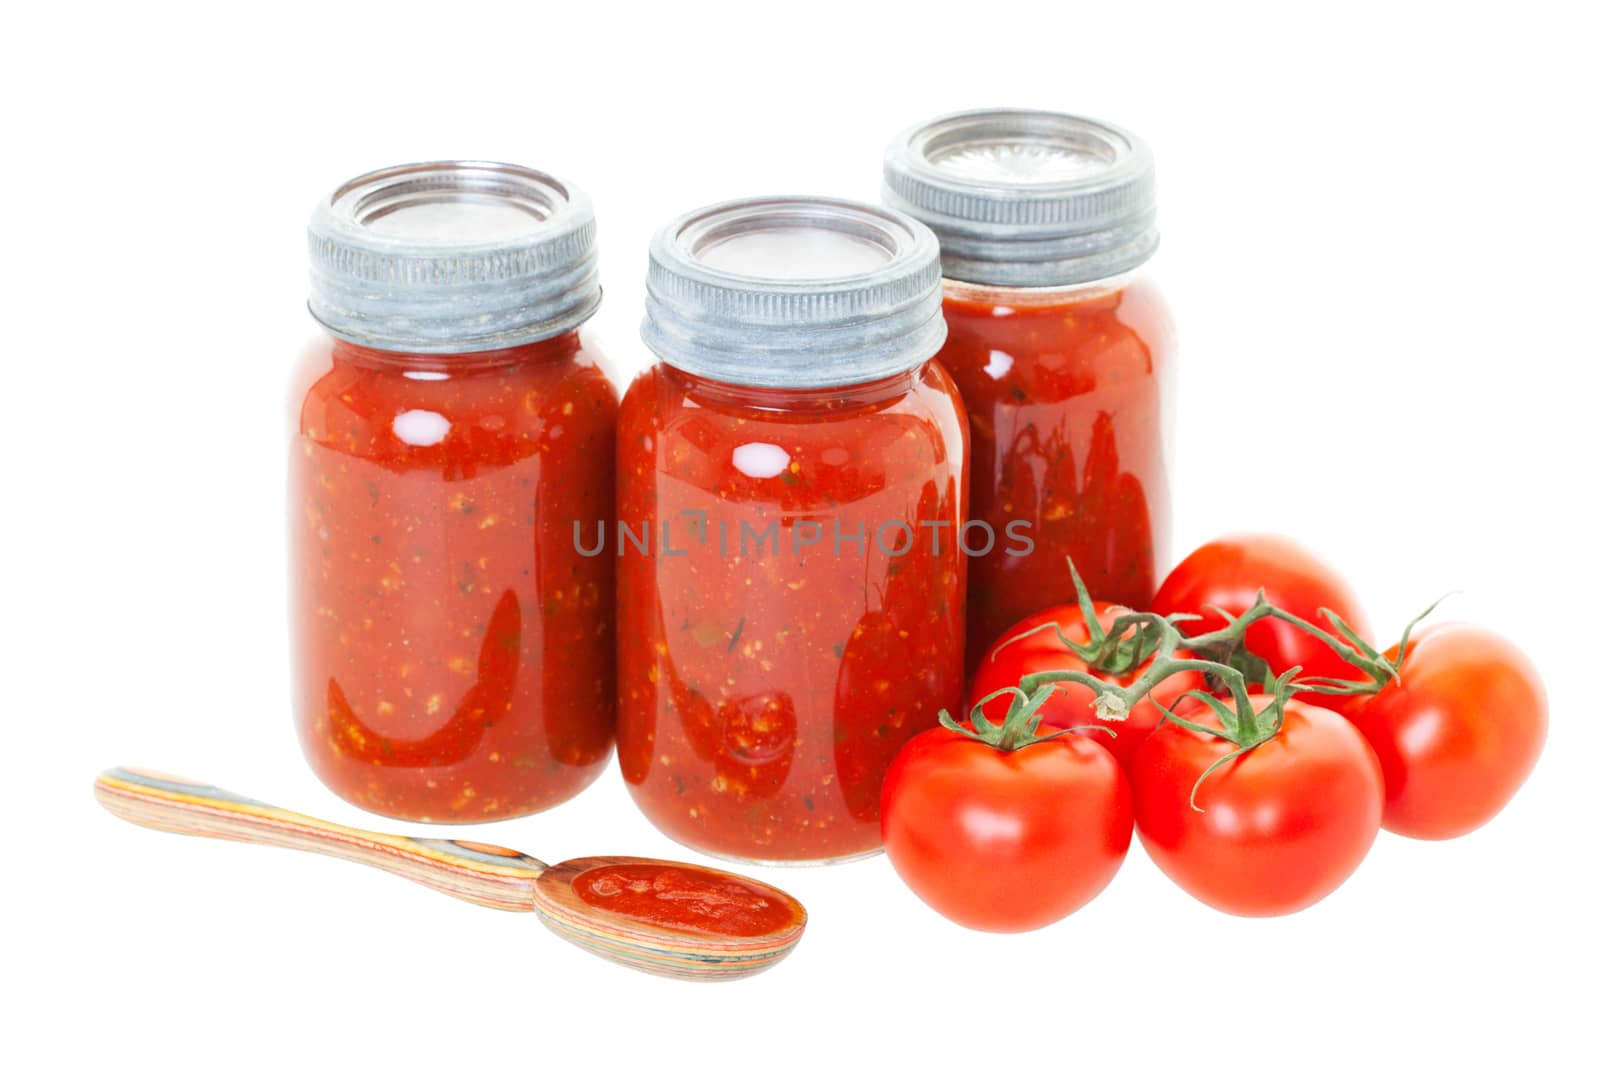 Home Canned Tomato Sauce by songbird839